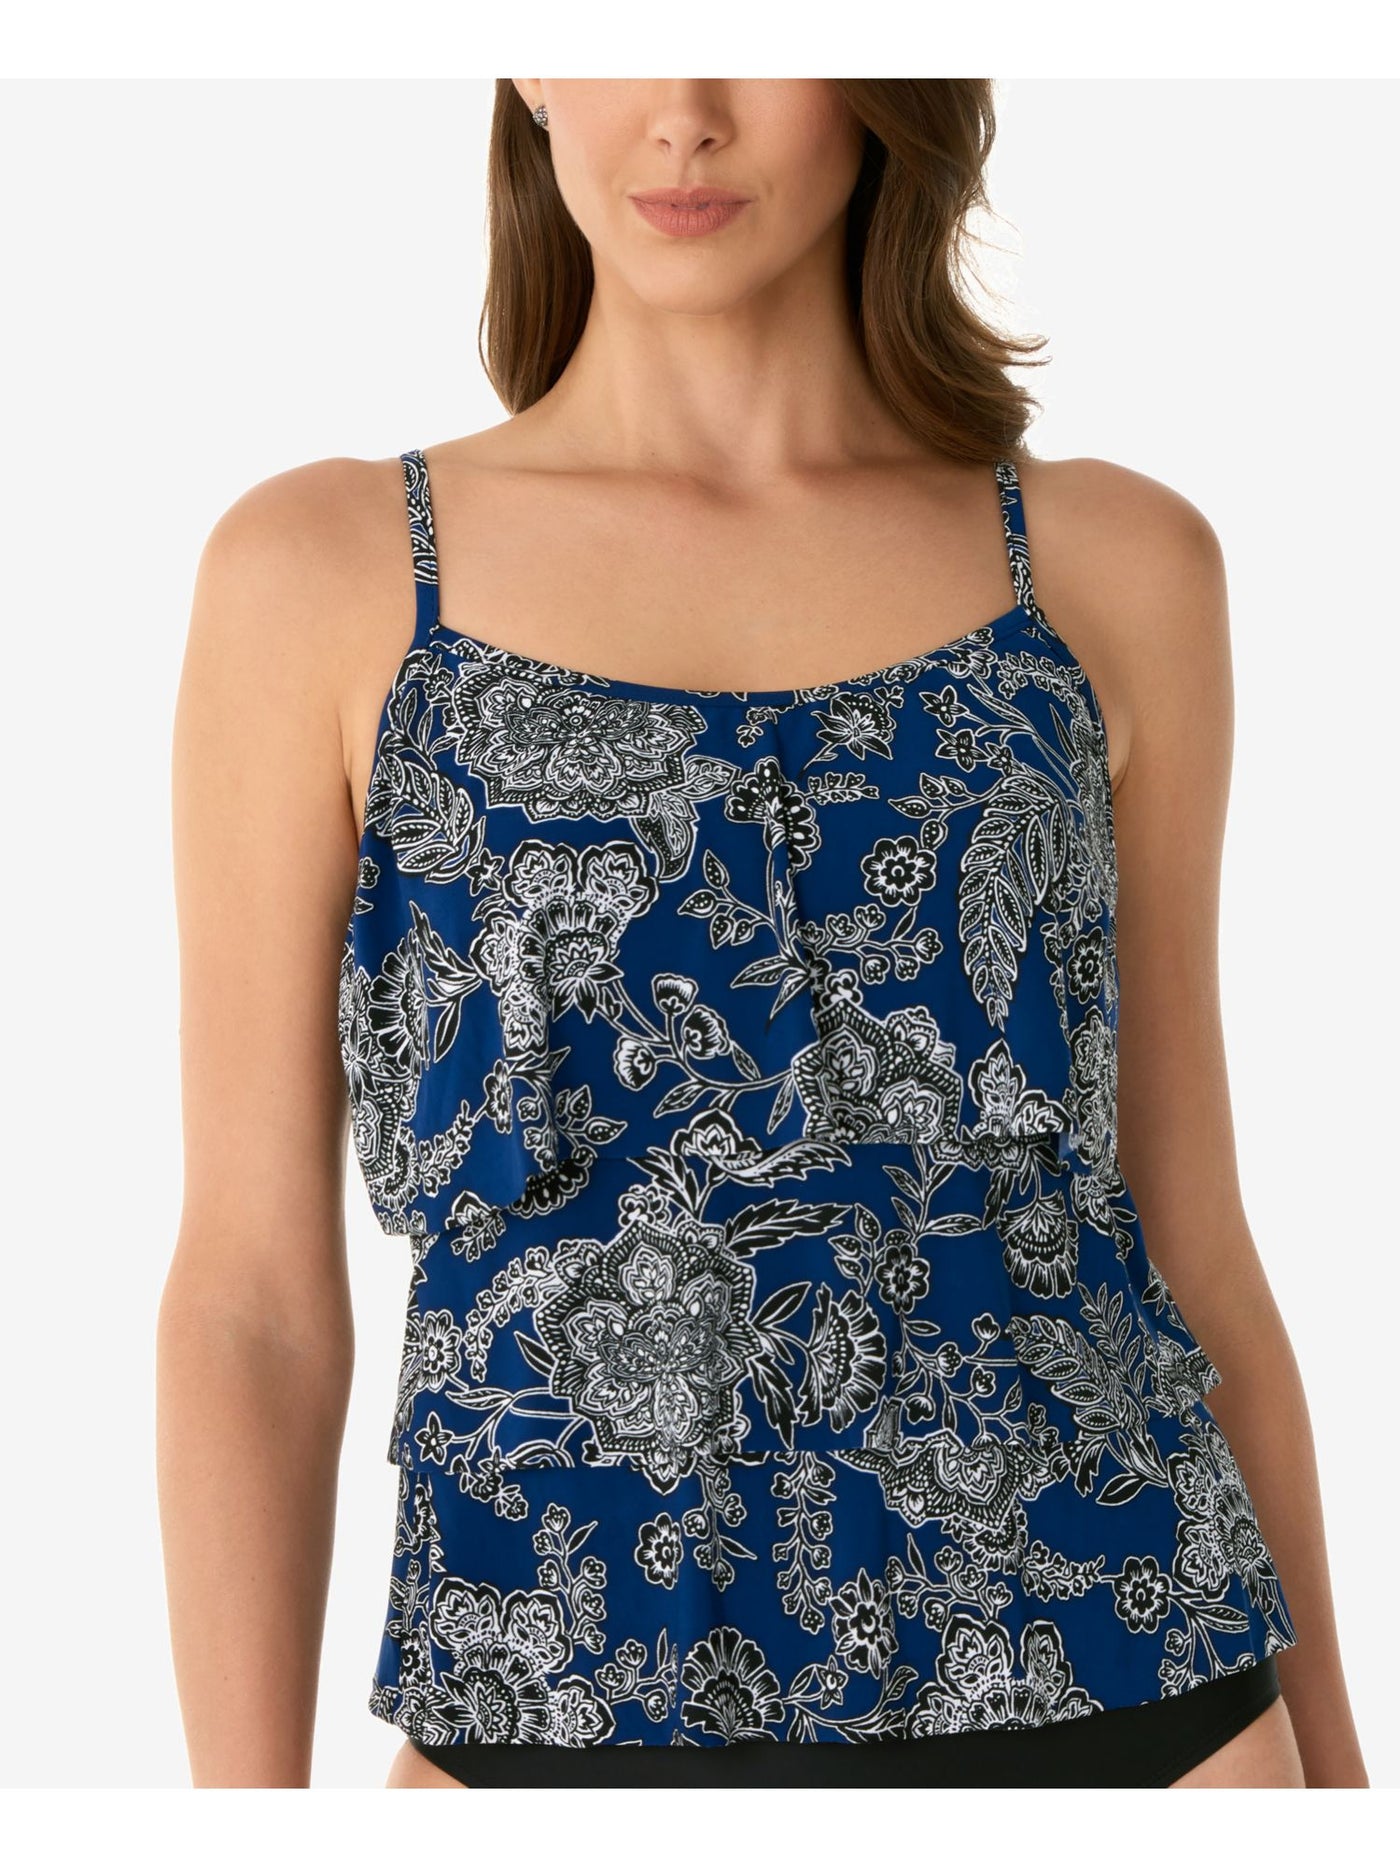 SWIM SOLUTIONS Women's Navy Paisley Stretch Full Bust Support Lined Adjustable Tiered Scoop Neck Tankini Swimsuit Top 8